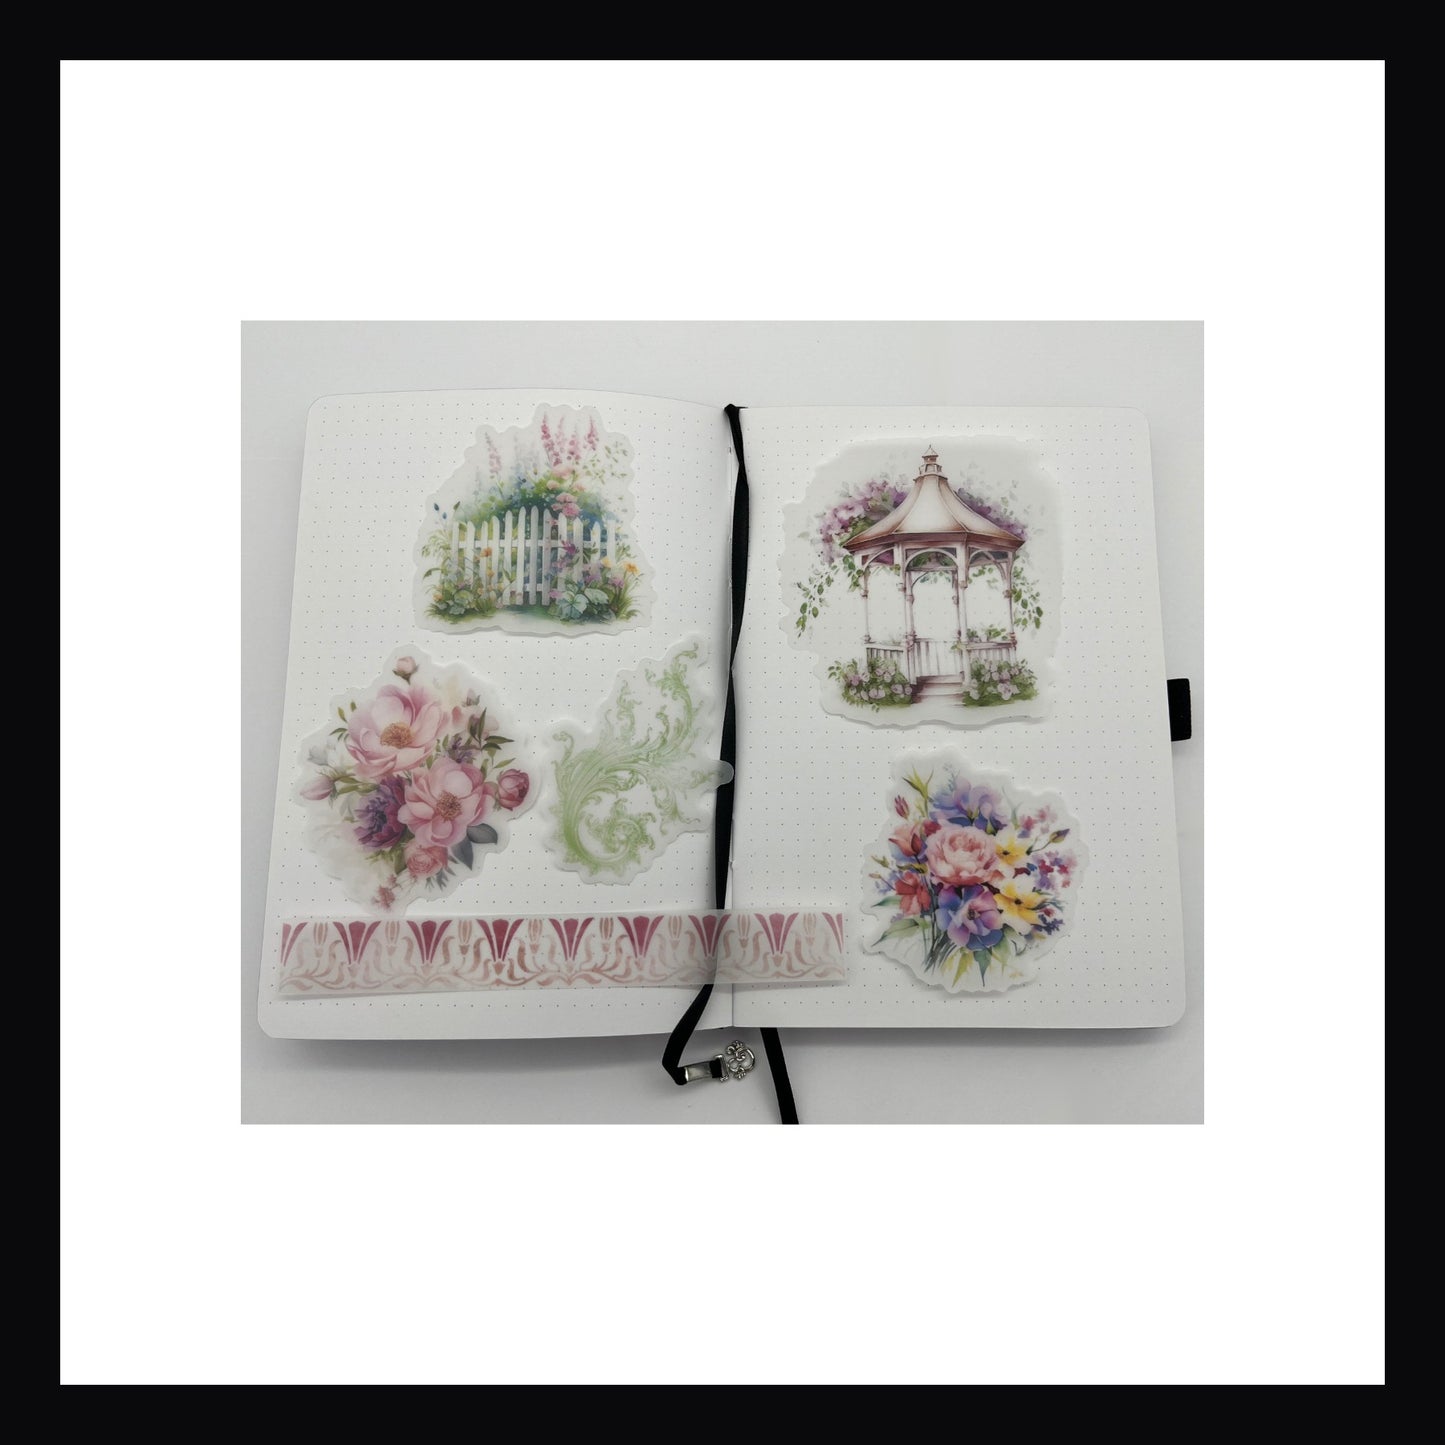 Gardening Junk Journaling Kit contains 6 vellum accents.  Accents are of varying sizes depending on the design.  Each accent is fancy cut around the printed image.